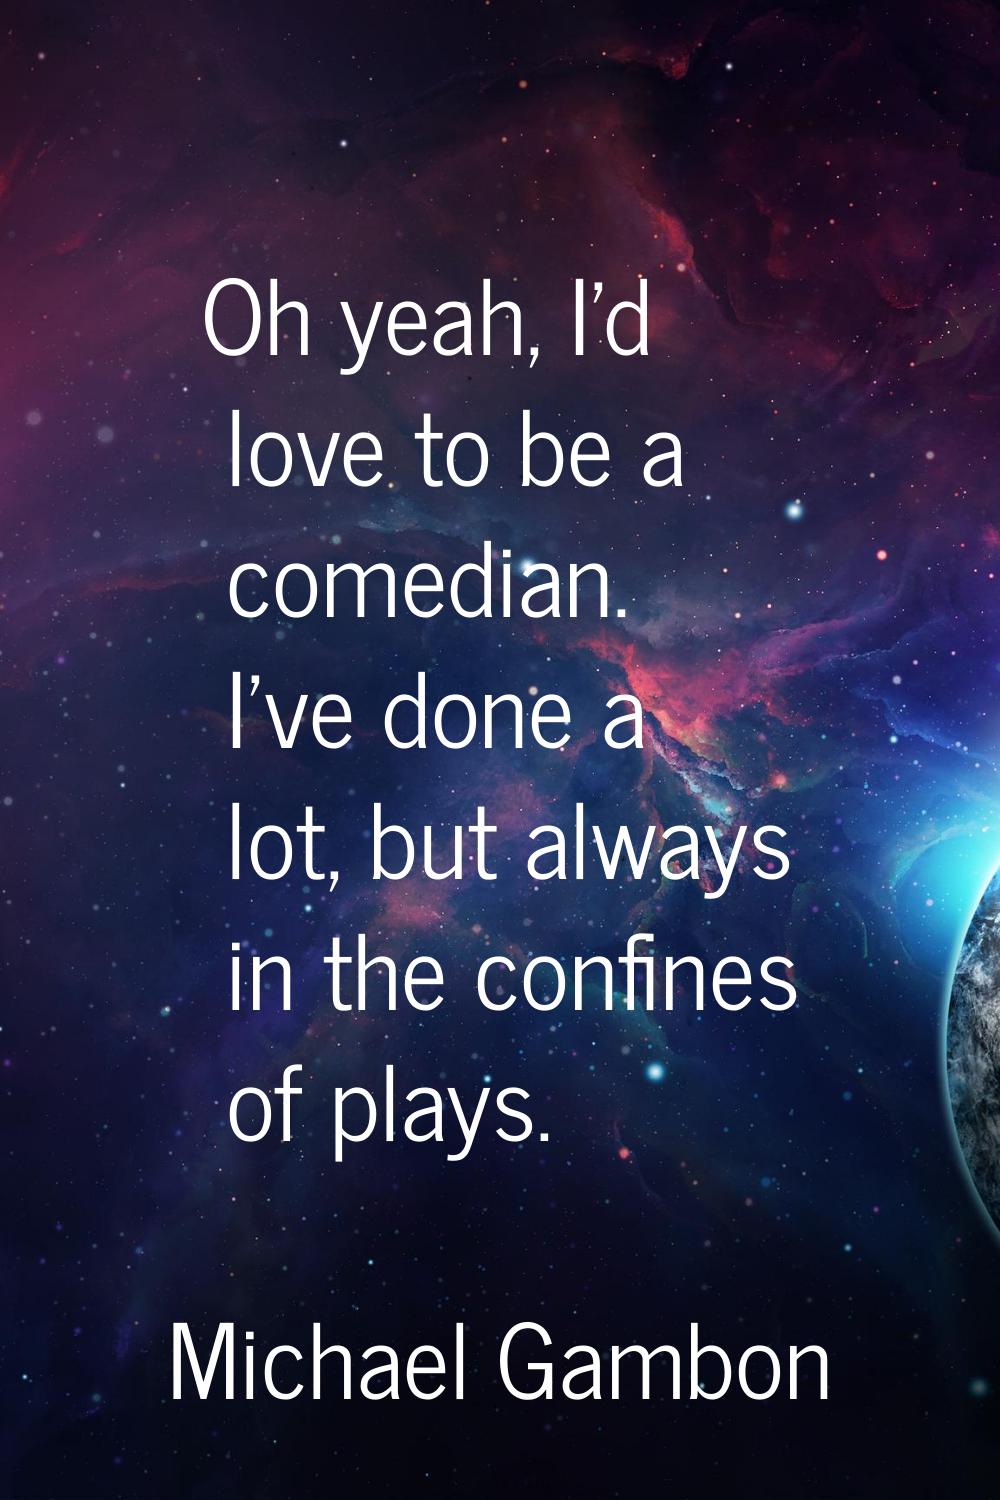 Oh yeah, I'd love to be a comedian. I've done a lot, but always in the confines of plays.